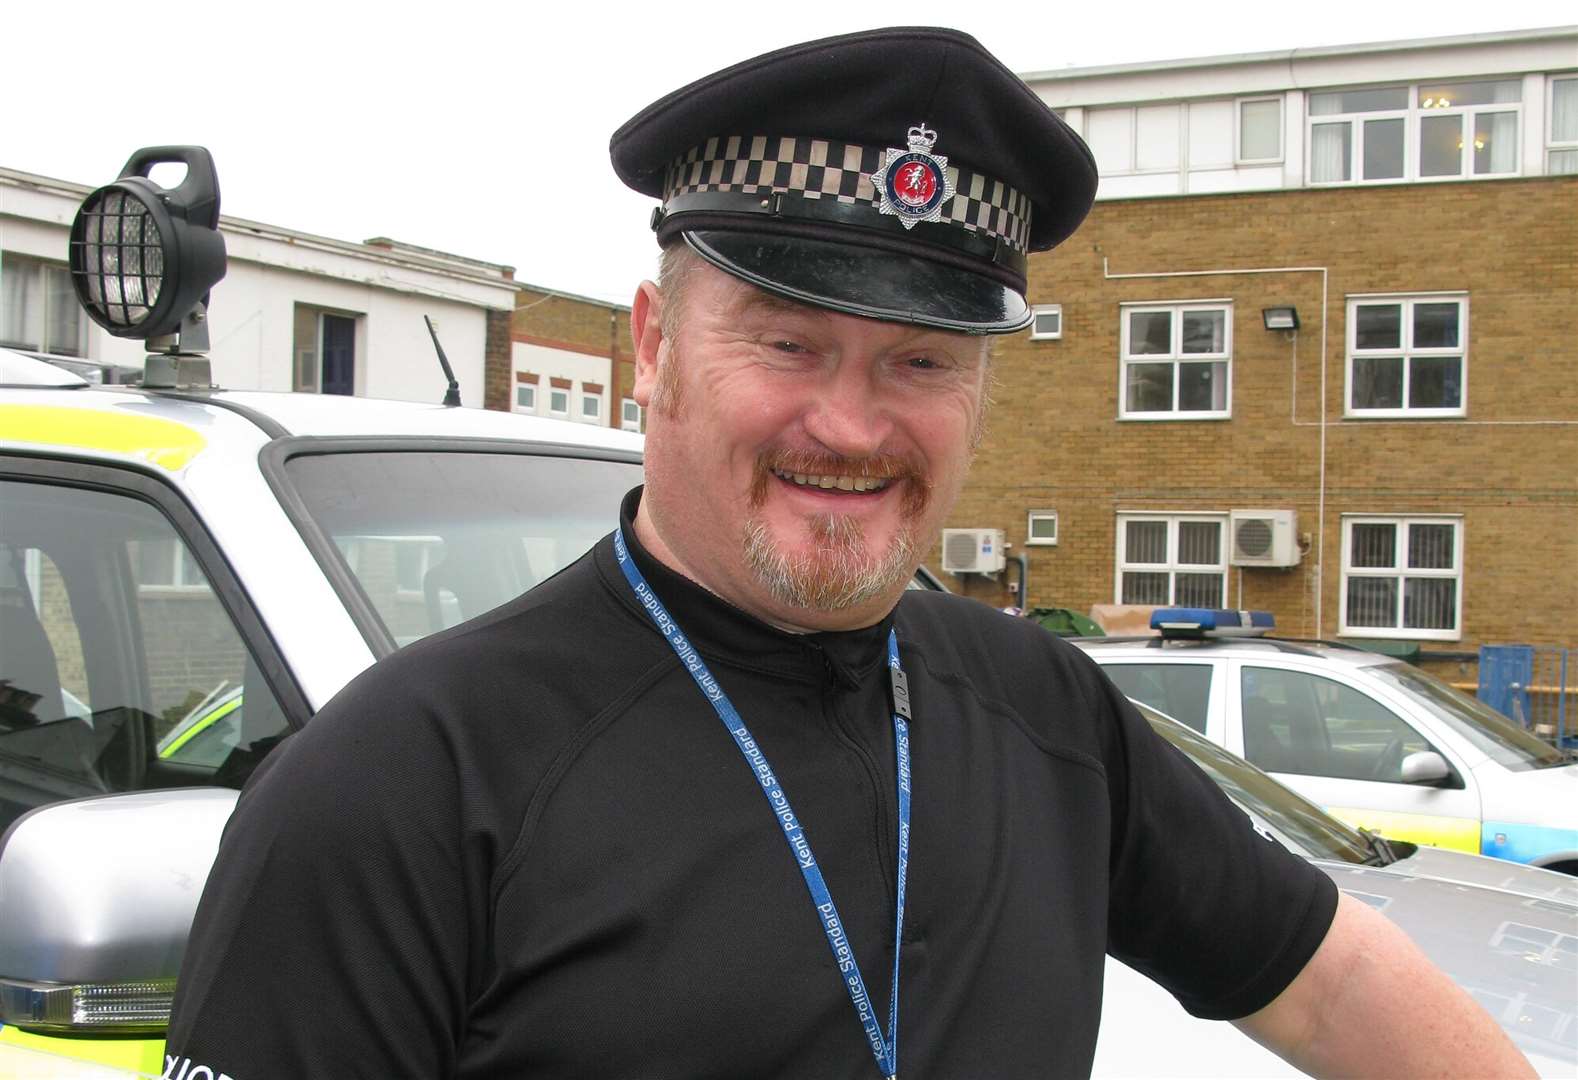 Stephen Thurman-Newell served with Kent Police for 30 years